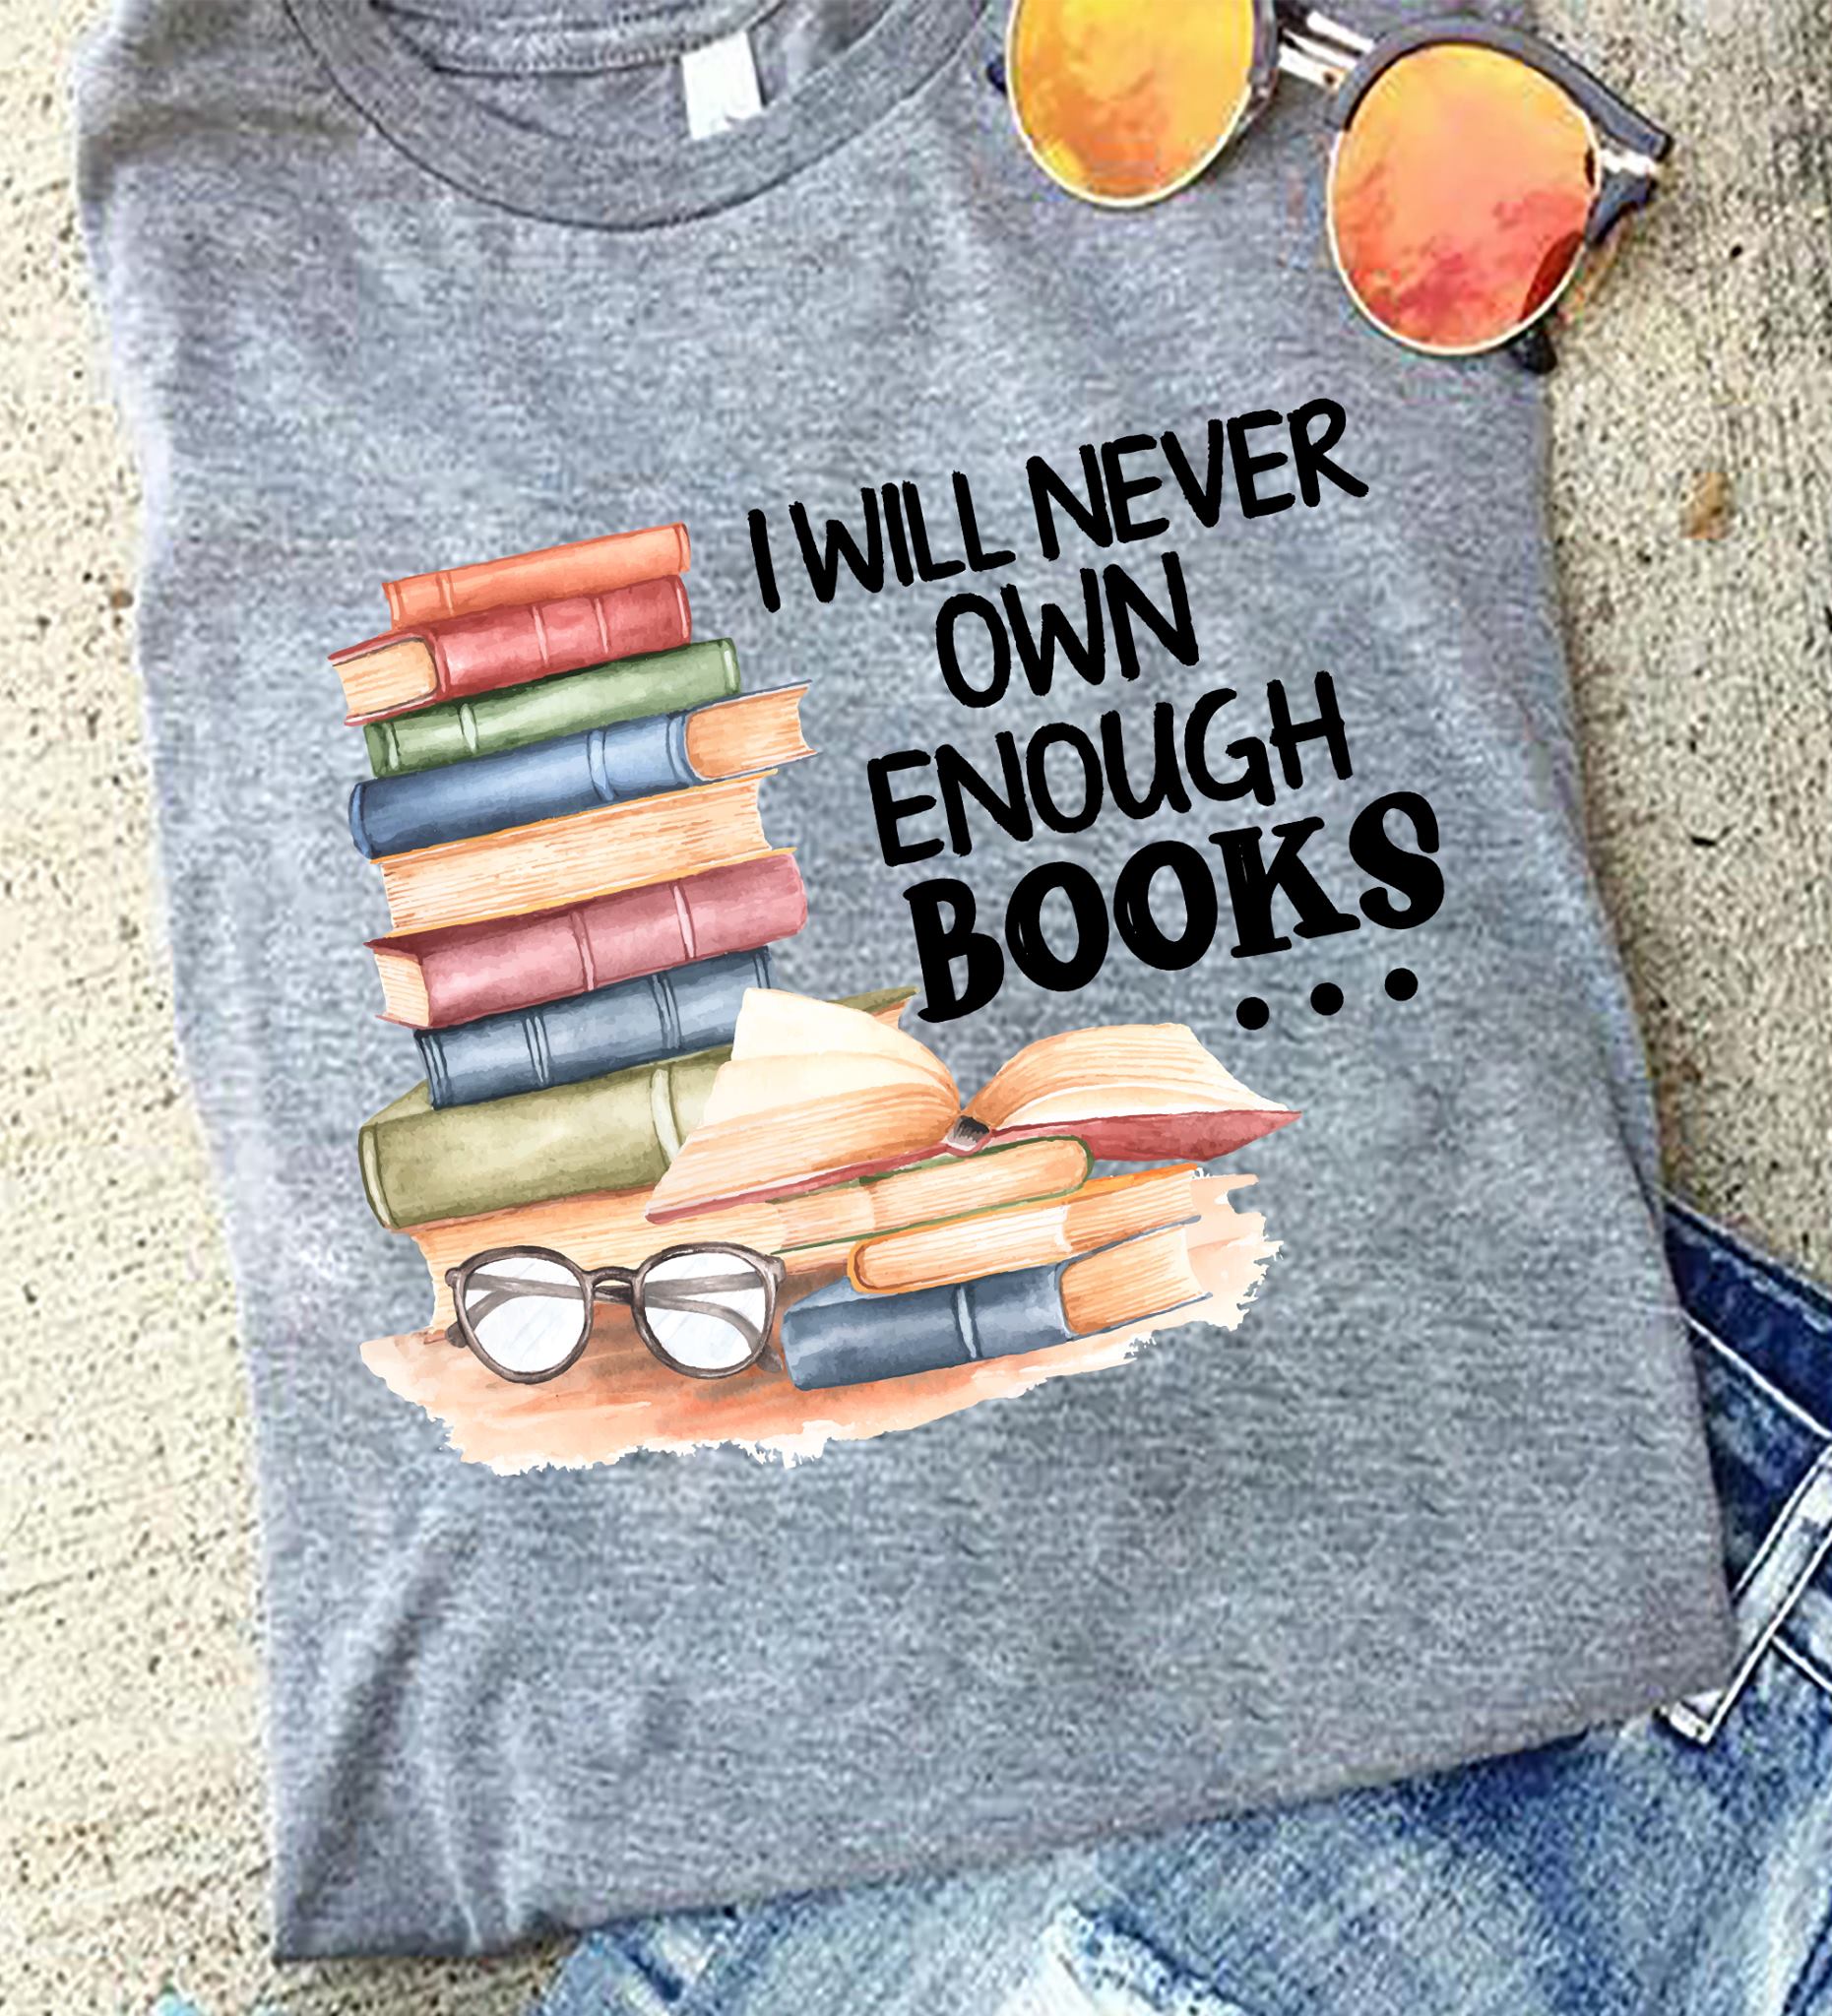 I will never own enough books - Book lover